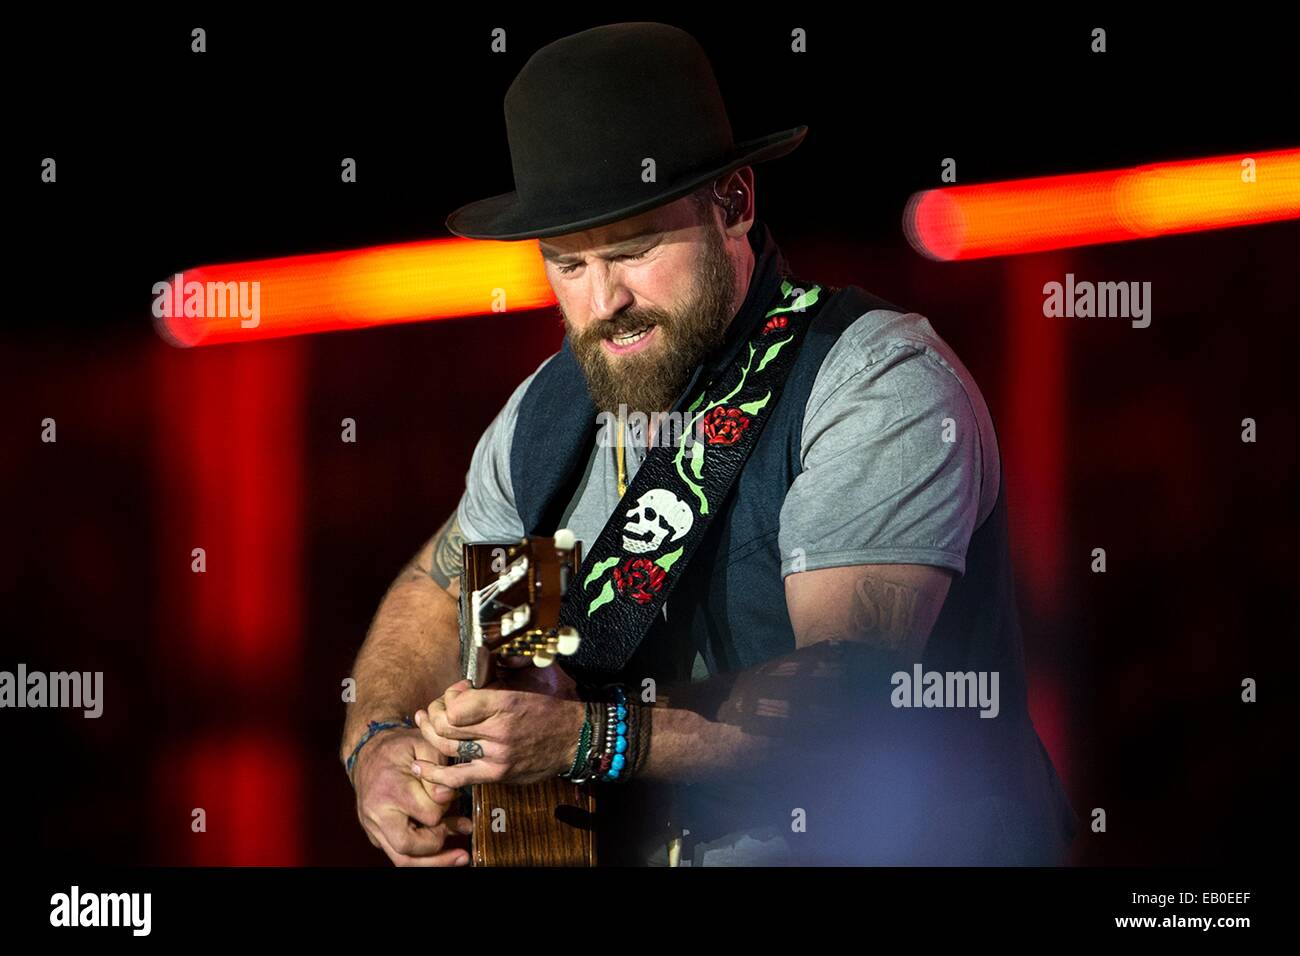 Zac Brown, lead vocalist of the Zac Brown Band performs during the Concert for Valor November 11, 2014 in Washington, D.C. Stock Photo